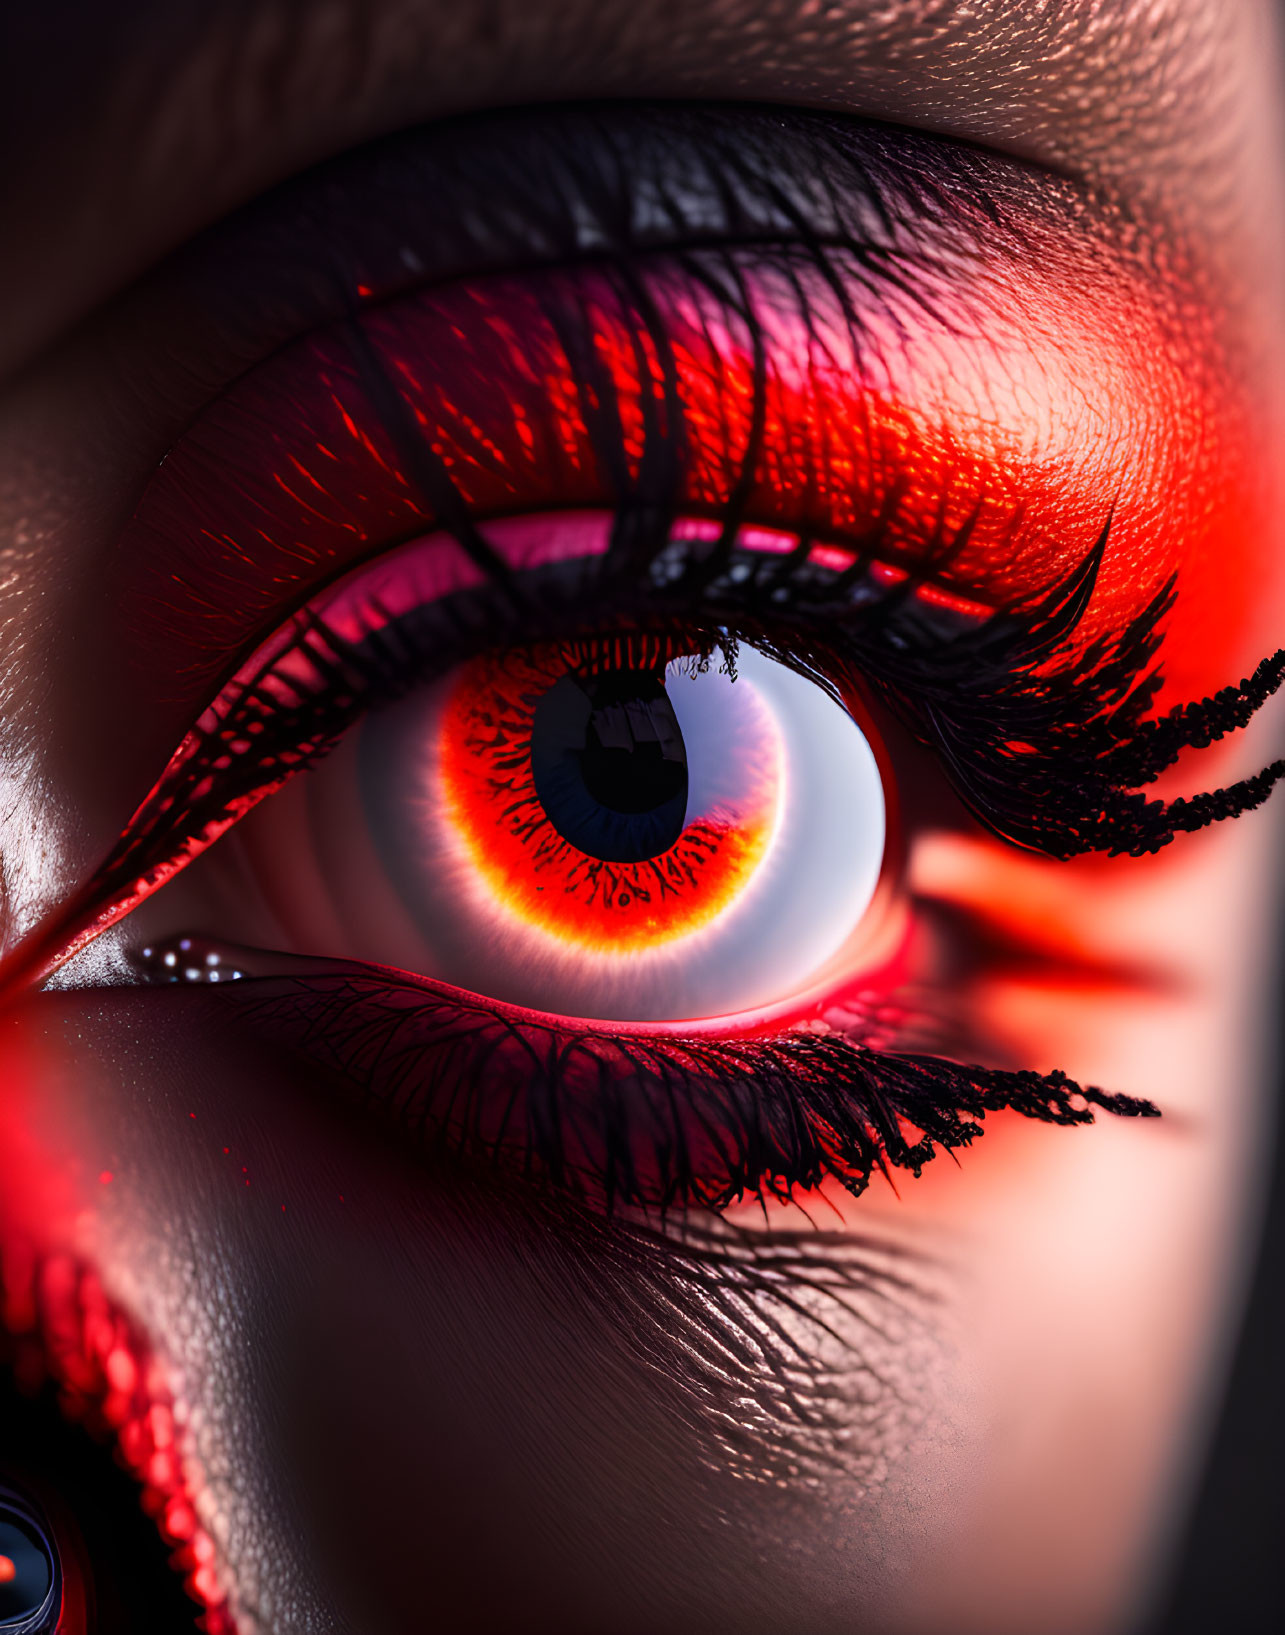 Detailed Close-Up of Eye with Red Eyeshadow and Mascara